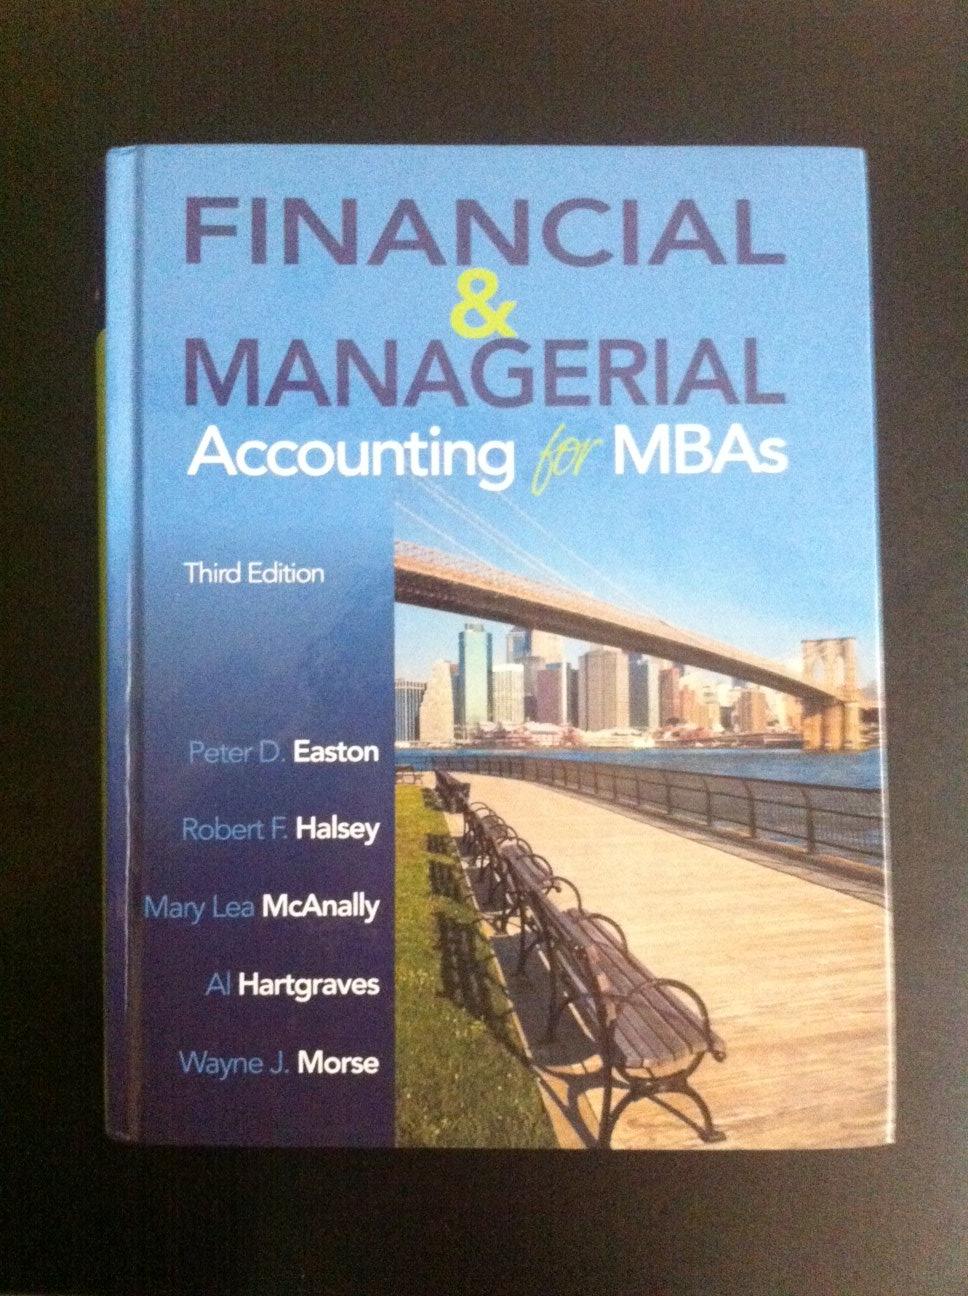 financial and managerial accounting for mbas 3rd edition peter d. easton, robert f. halsey, mary lea